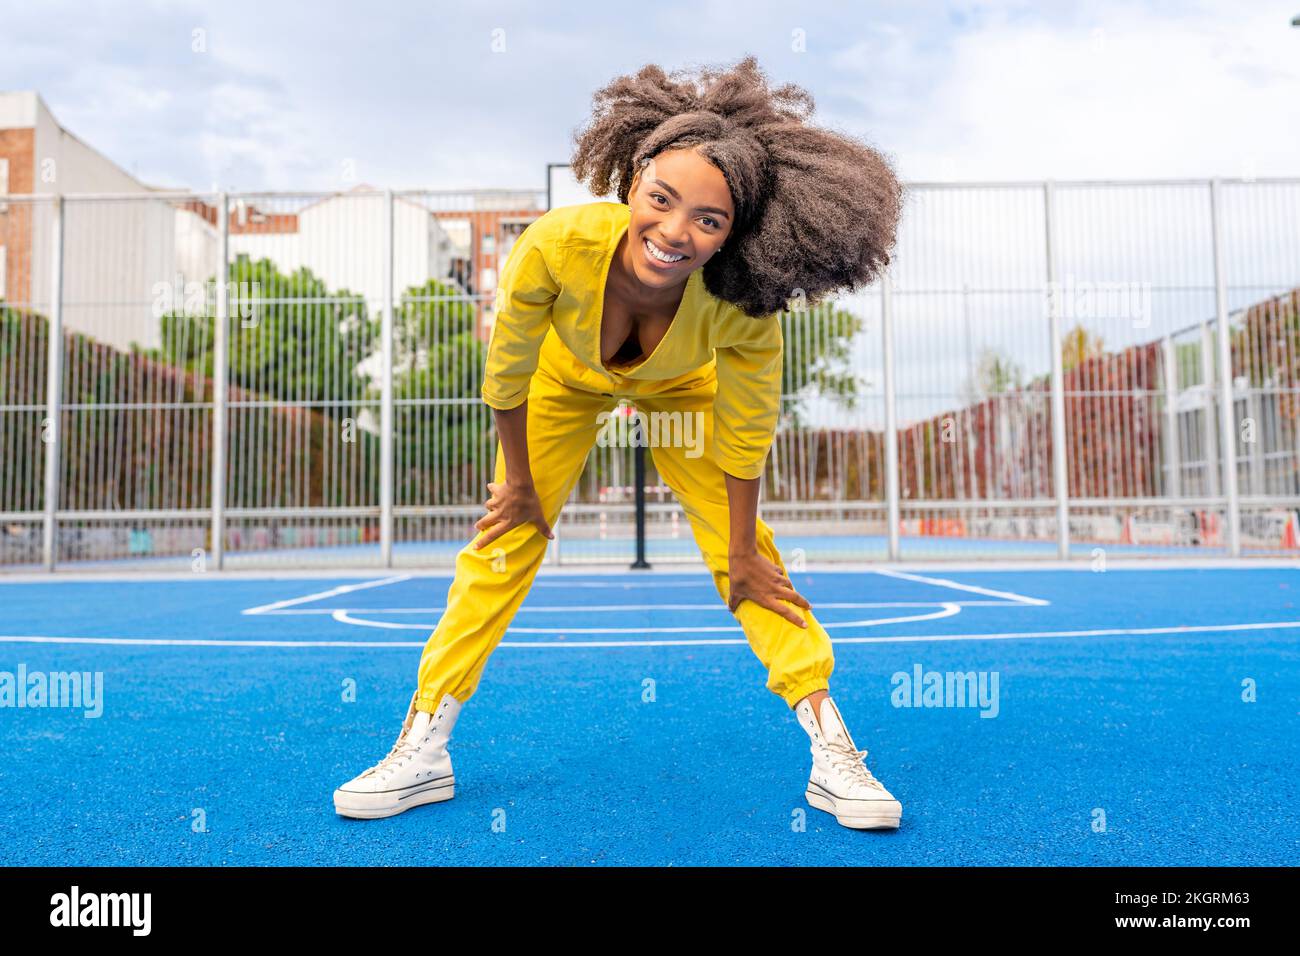 Happy young woman with Afro hairstyle bending on sports court Stock Photo